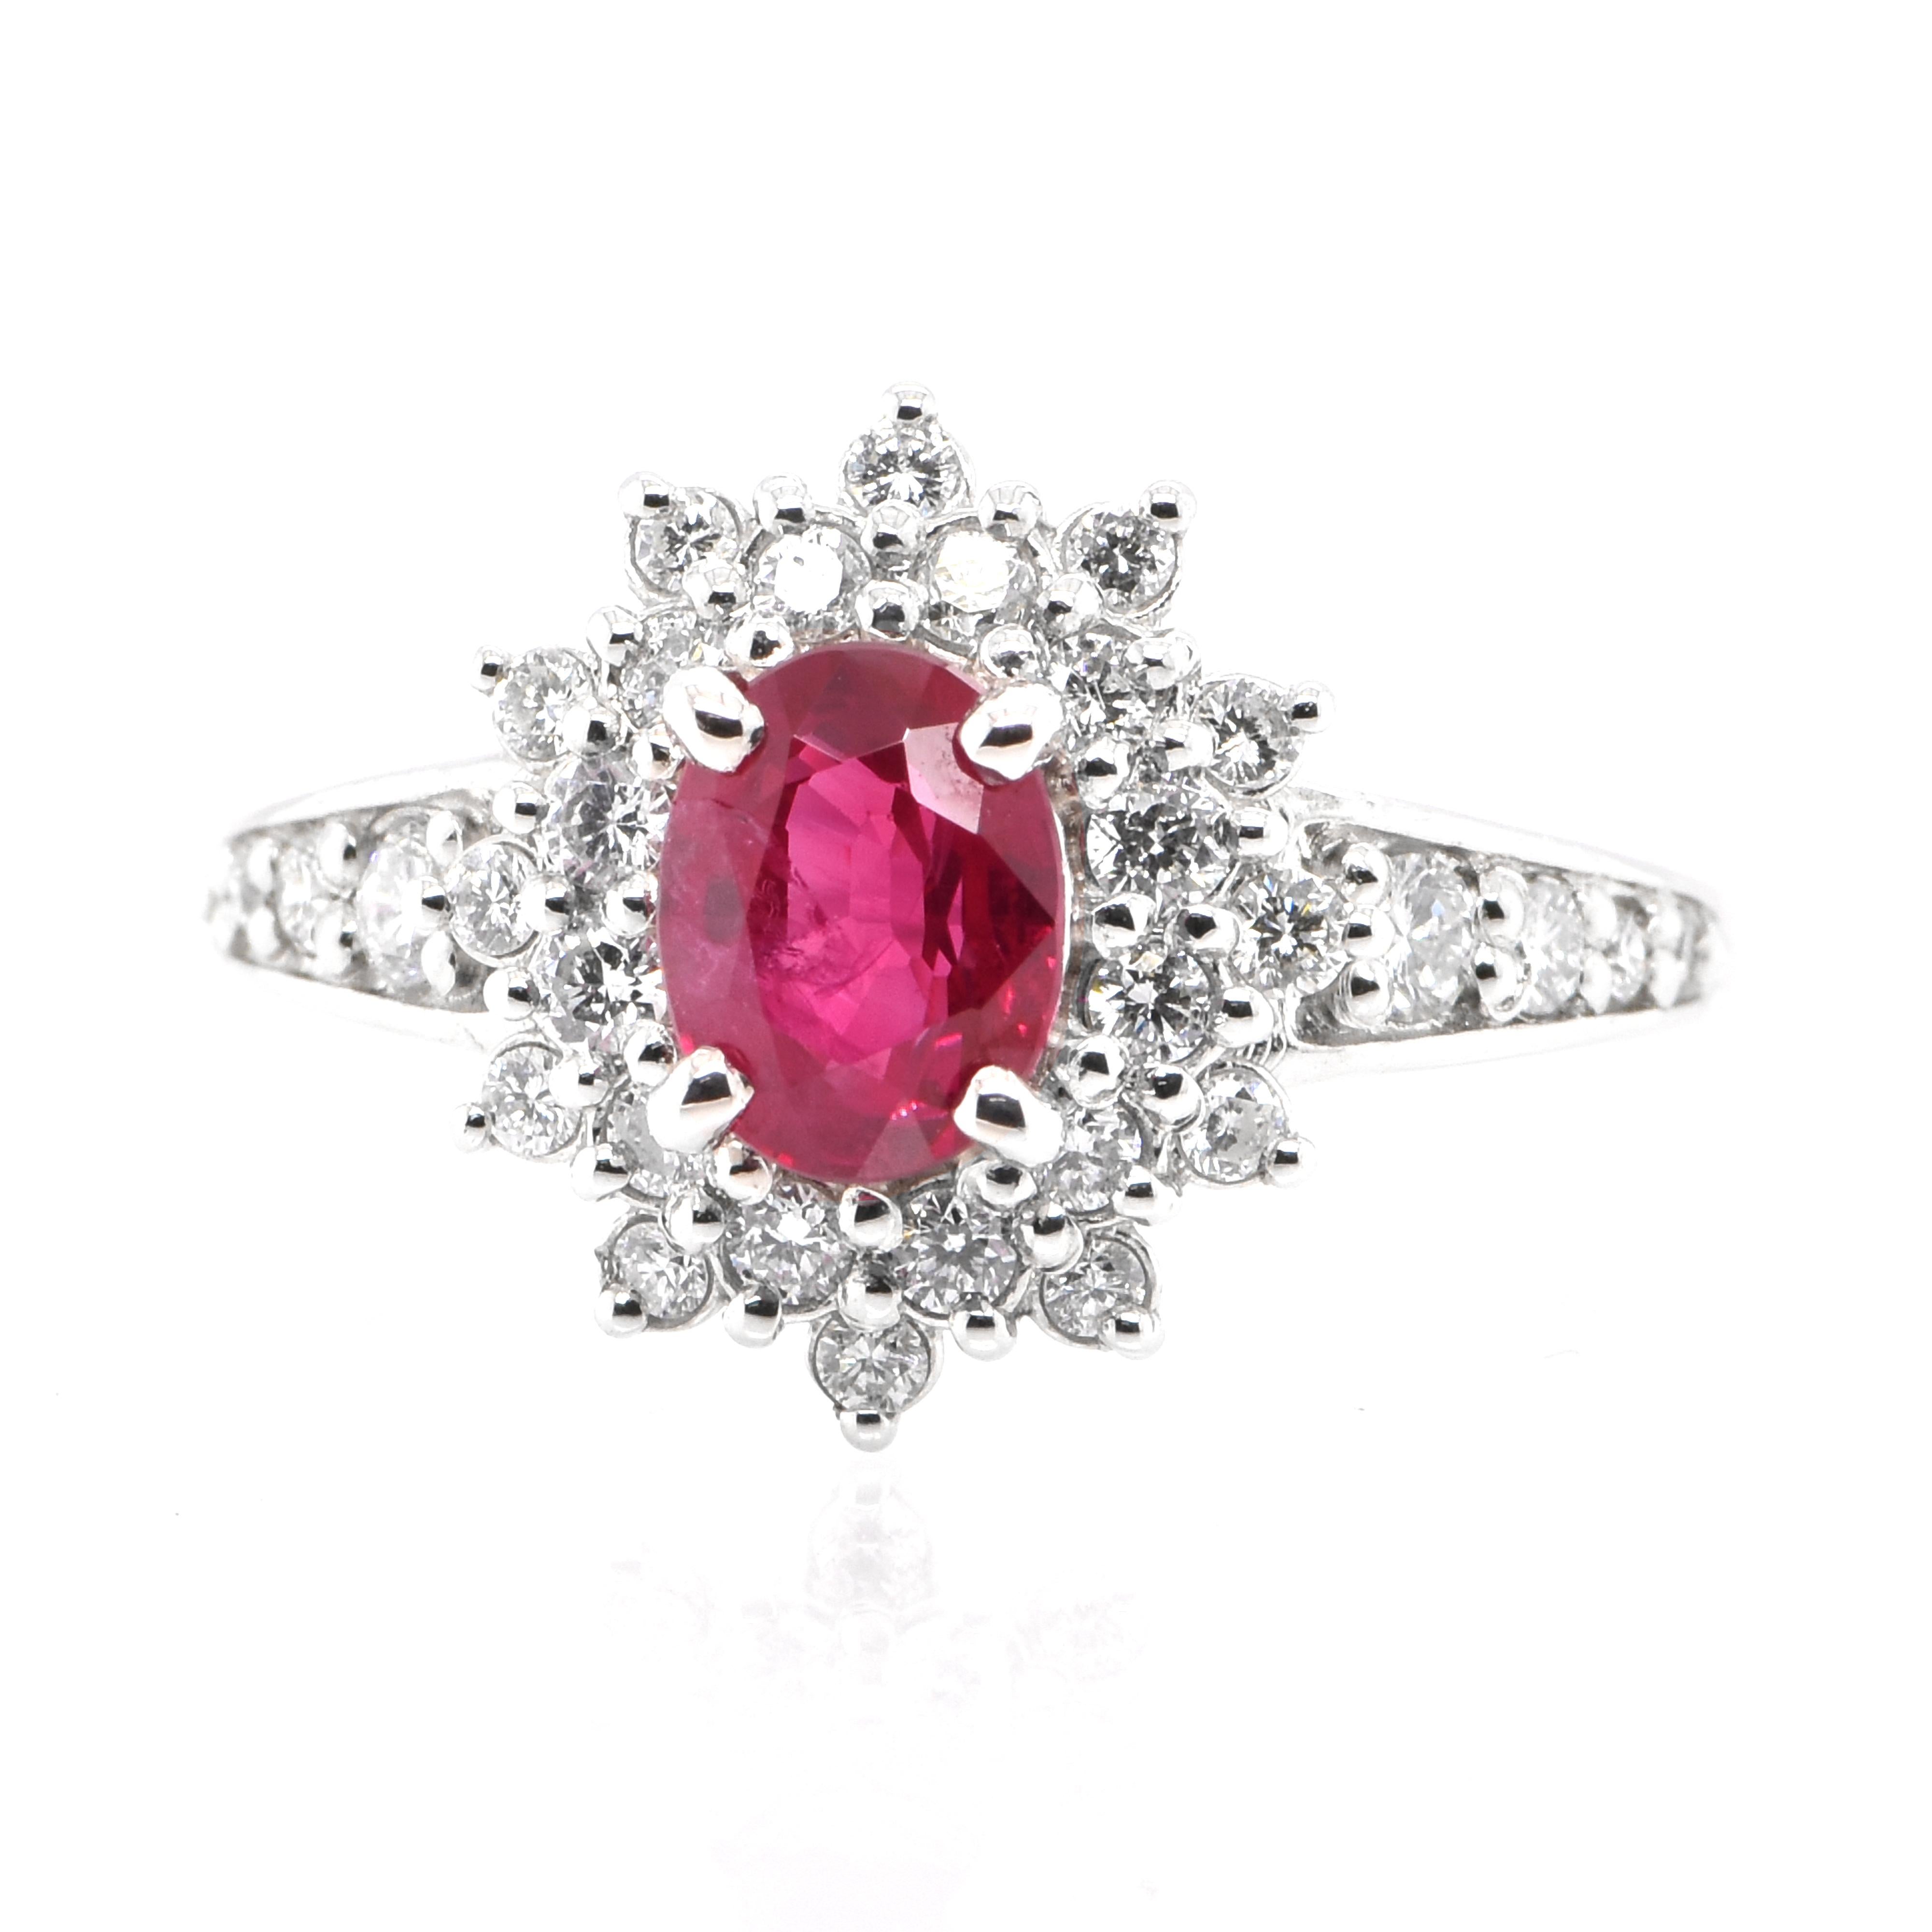 A beautiful ring set in Platinum featuring a 1.15 Carat Natural Ruby and 0.50 Carat Diamonds. Rubies are referred to as 